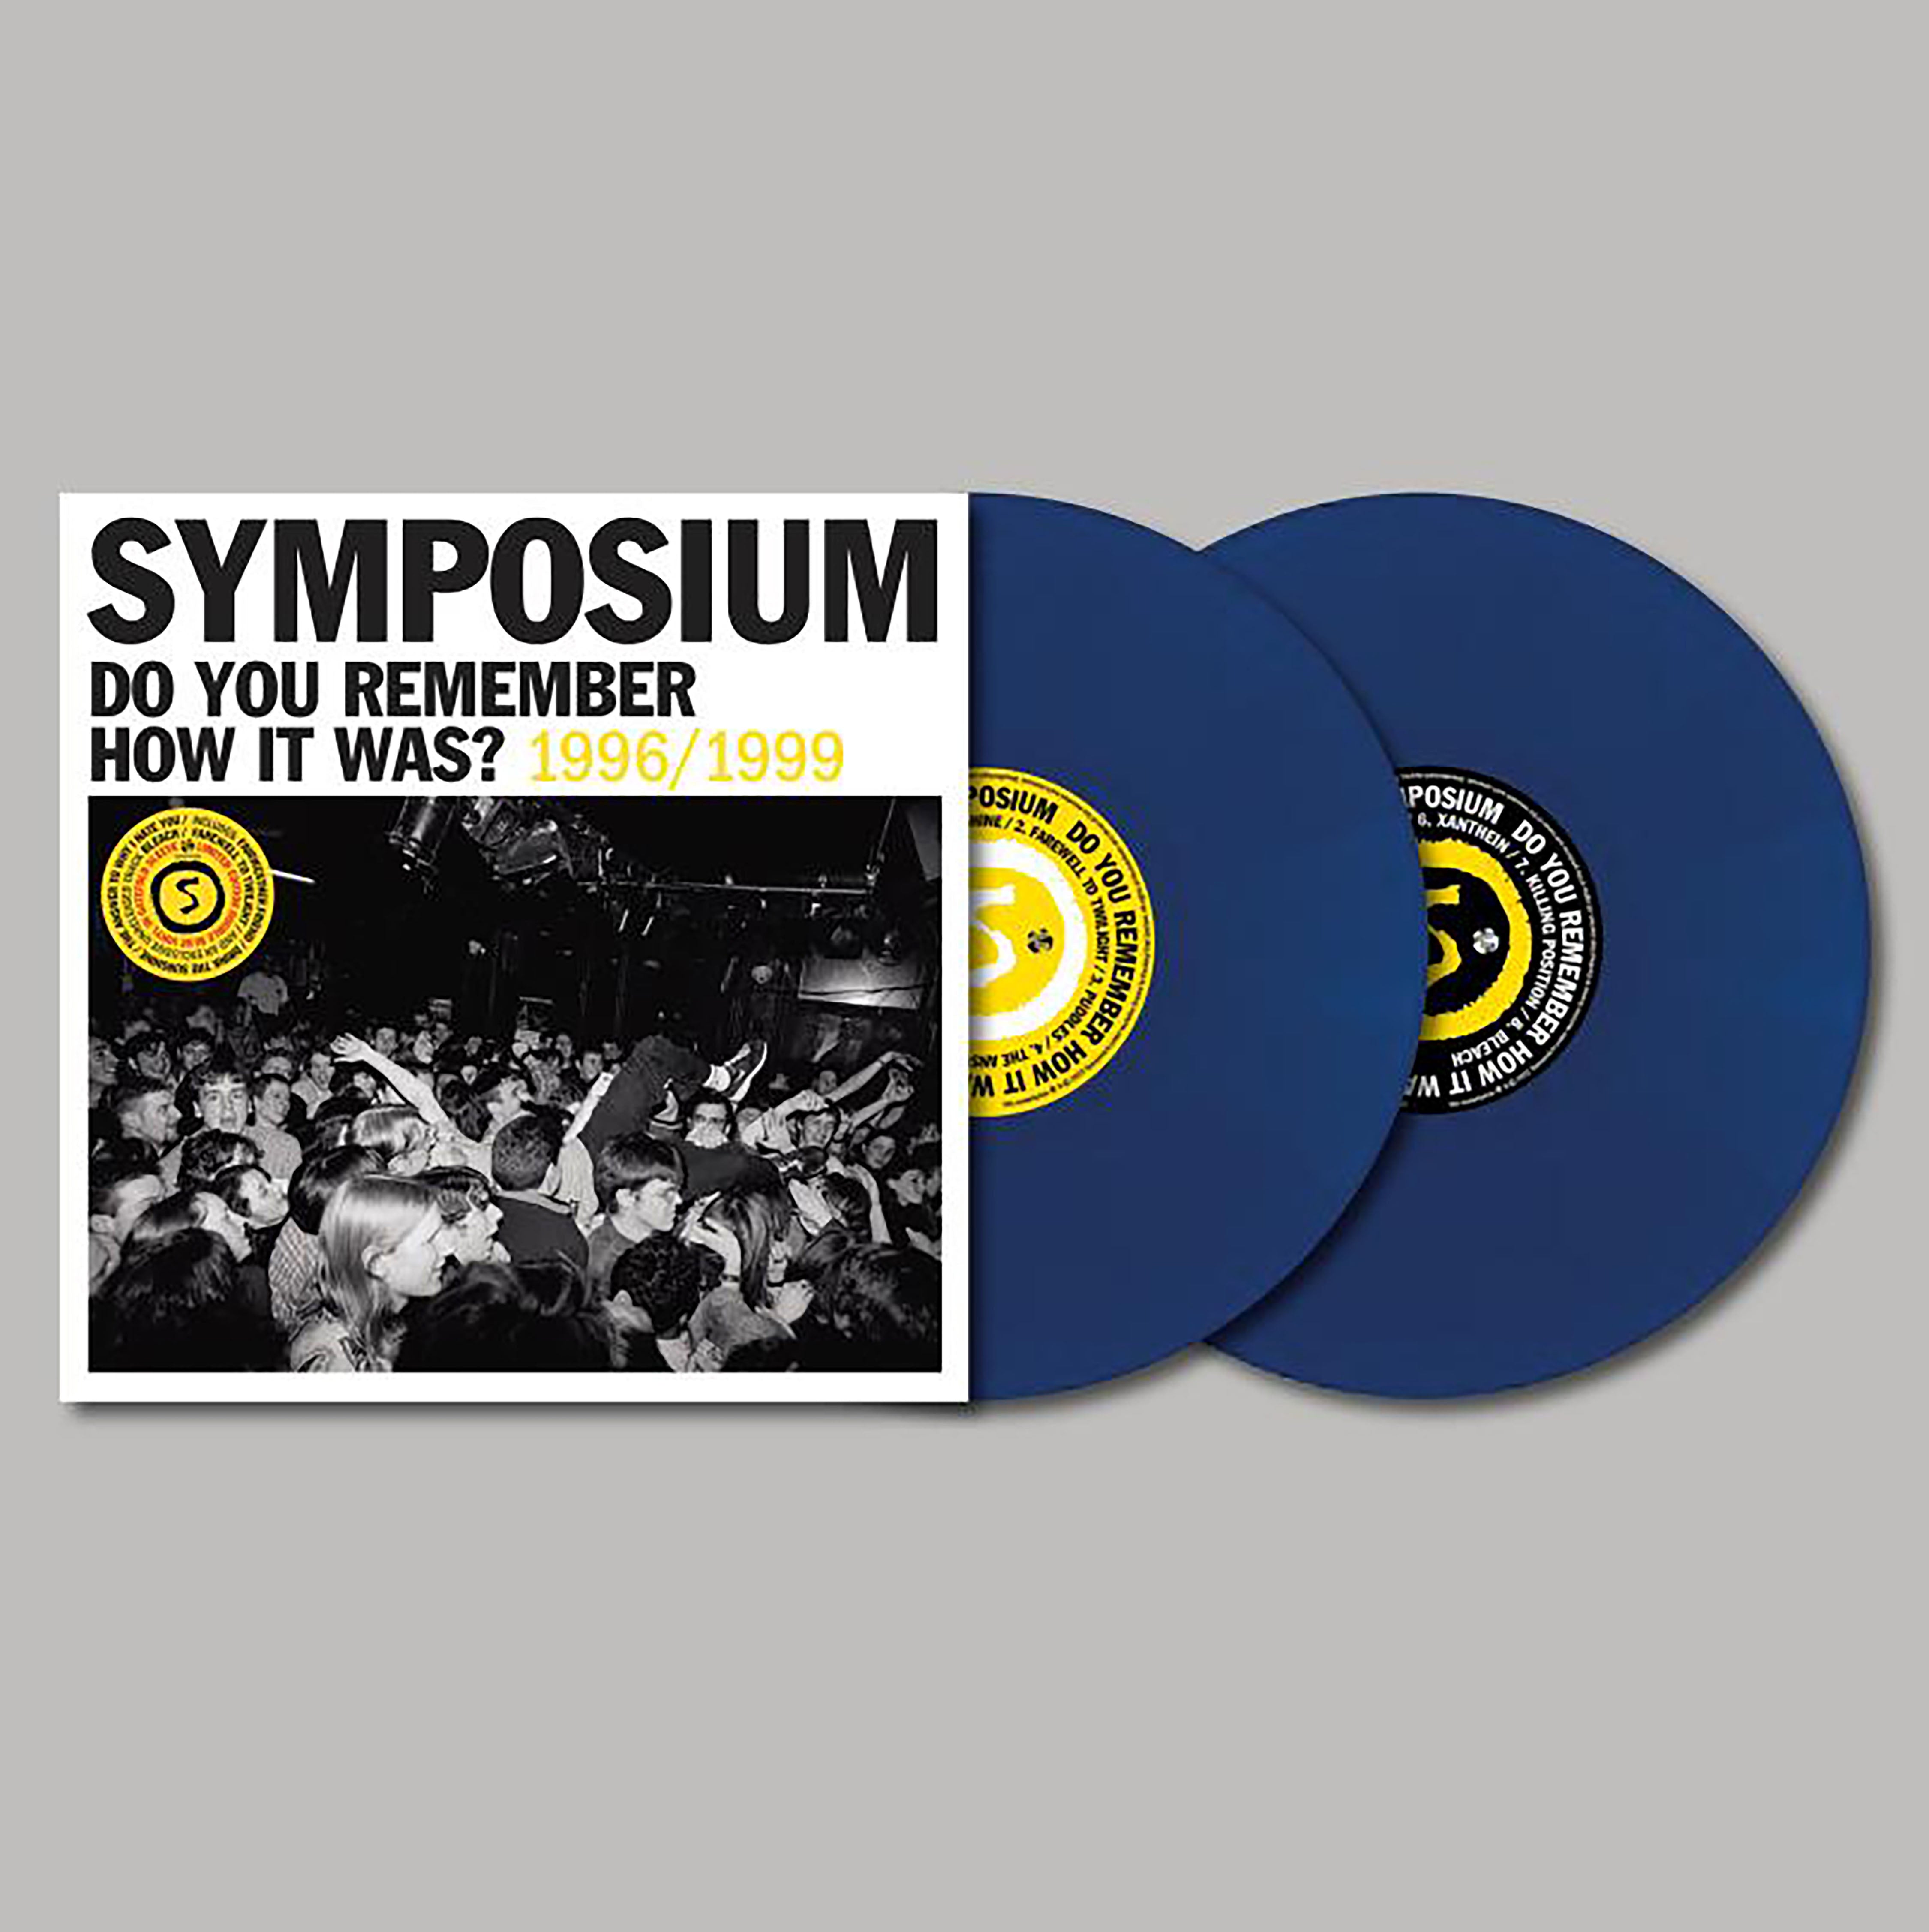 Symposium - Do You Remember How It Was? - The Best Of Symposium (1996 1999): Exclusive Vinyl 2LP